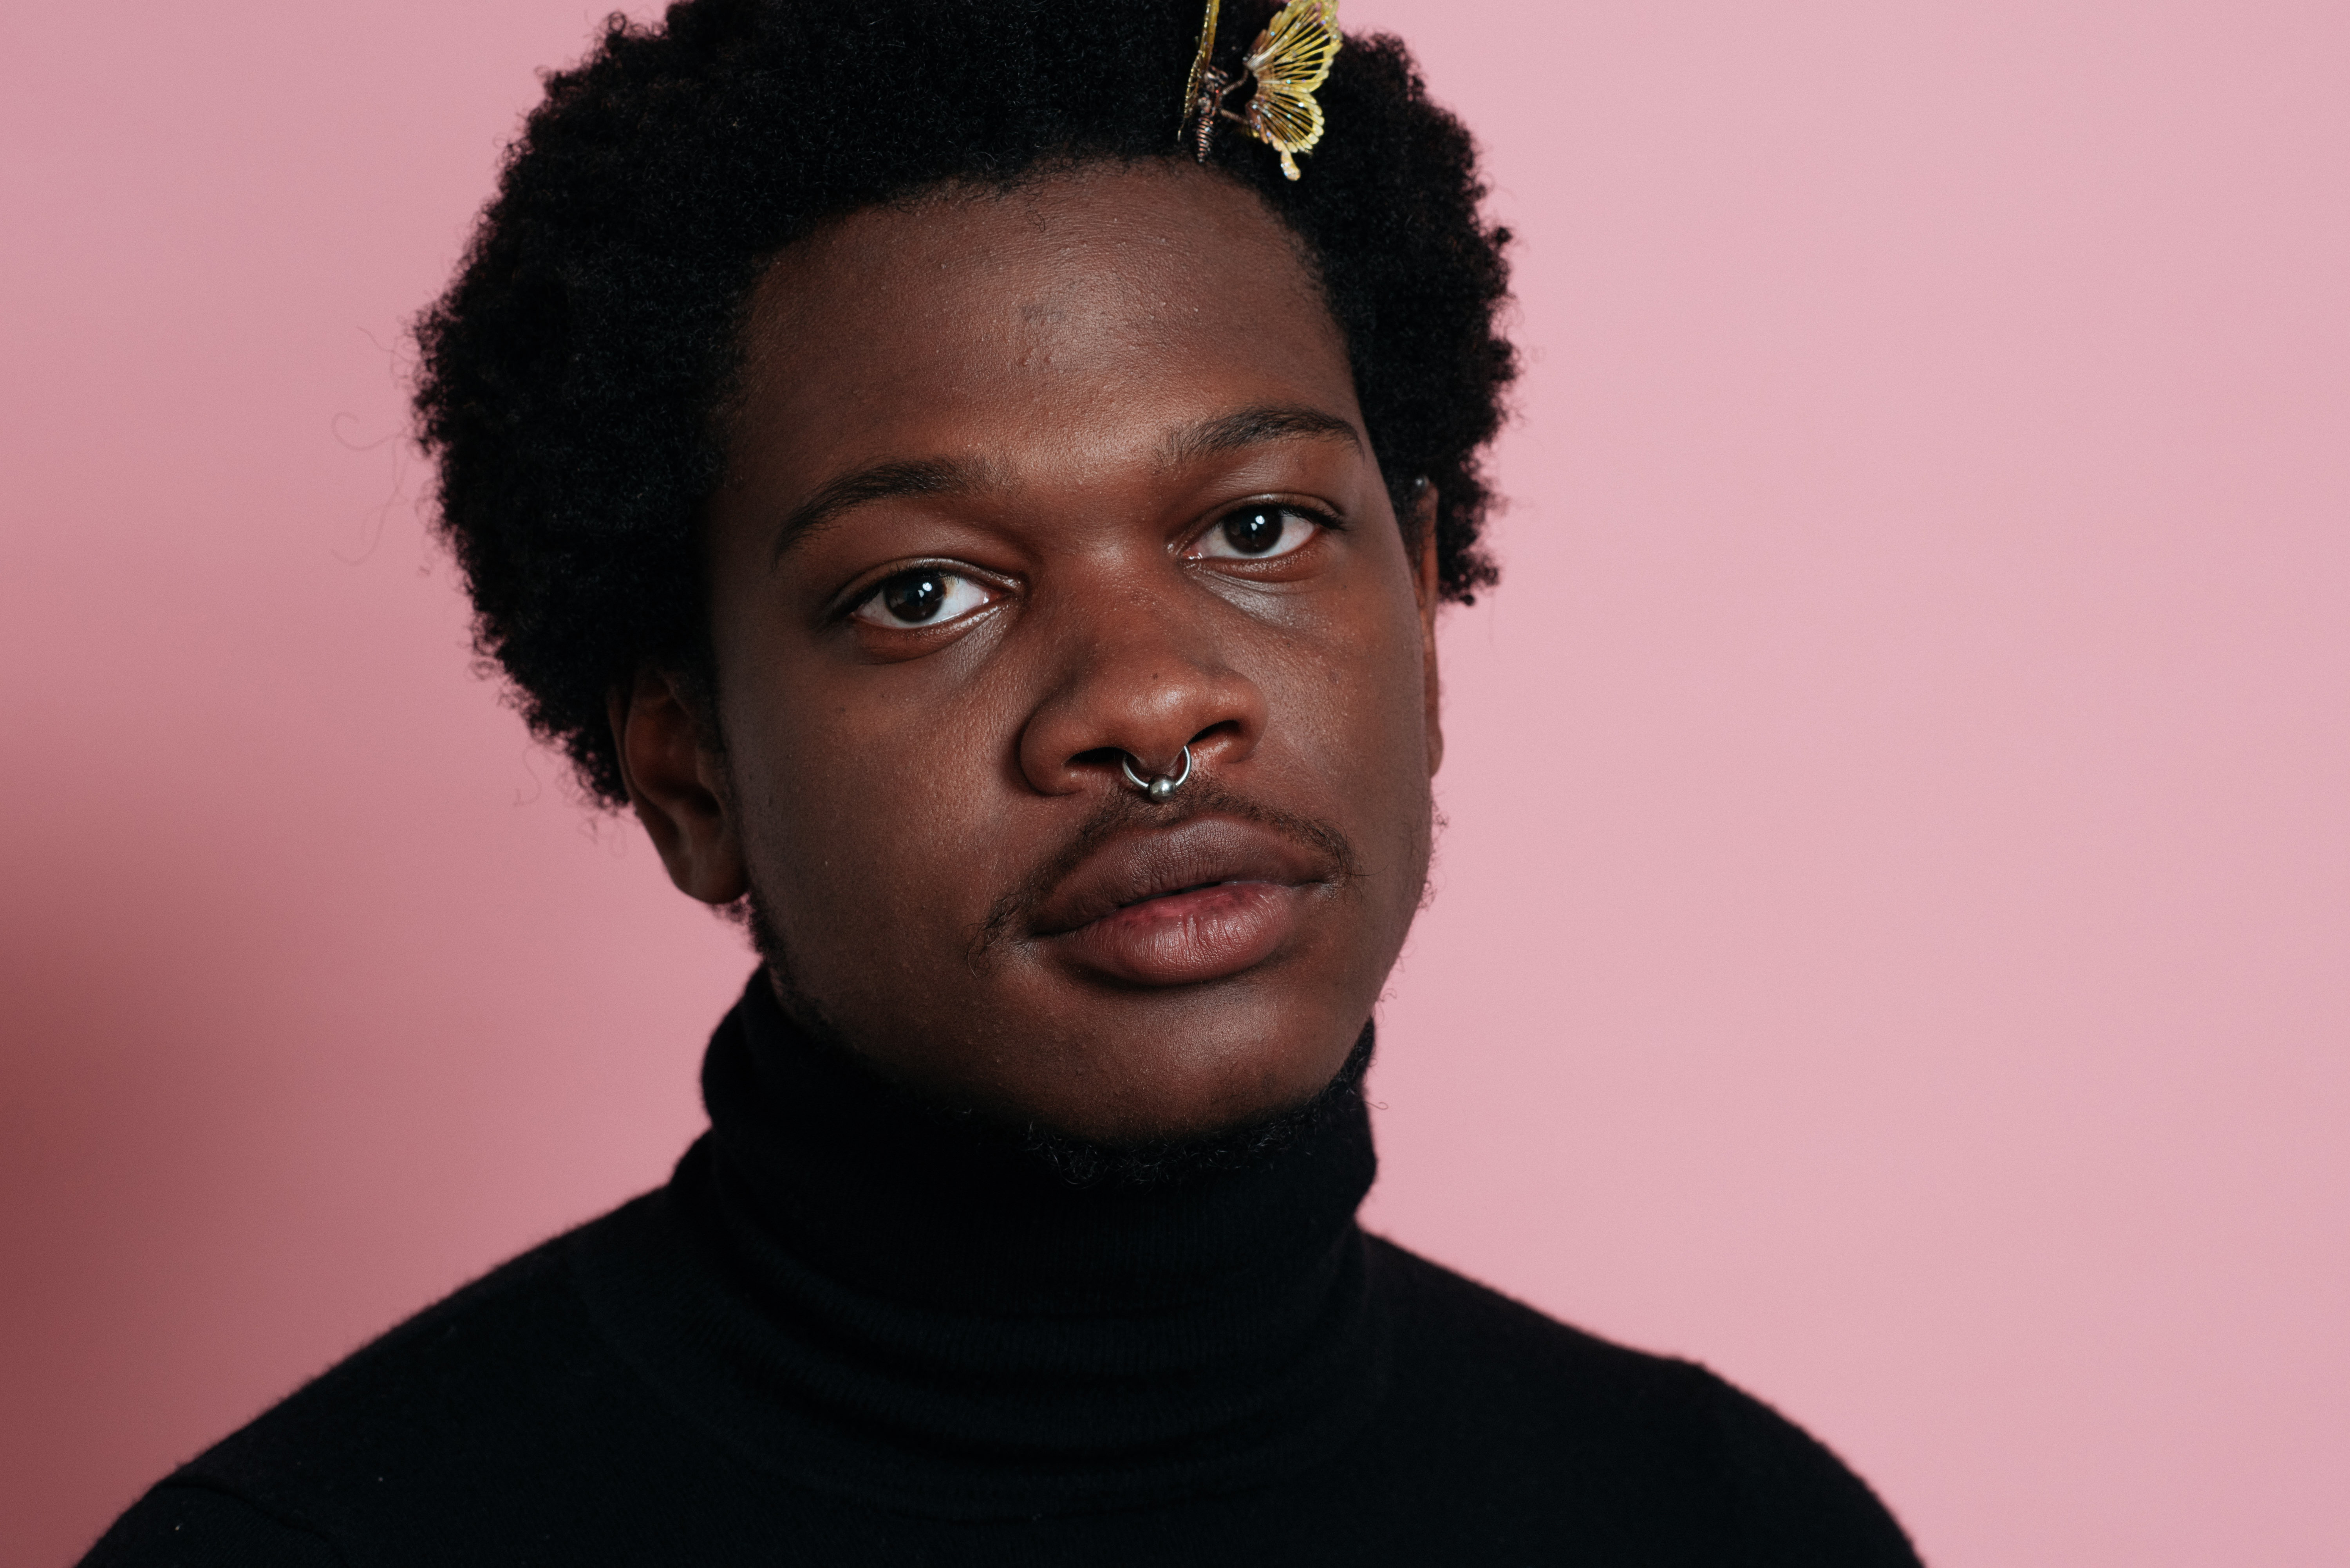 Shamir Interview: In our Interview with Shamir, the singer/songwriter discusses Mental Health, Revelations, shelved records, and more.